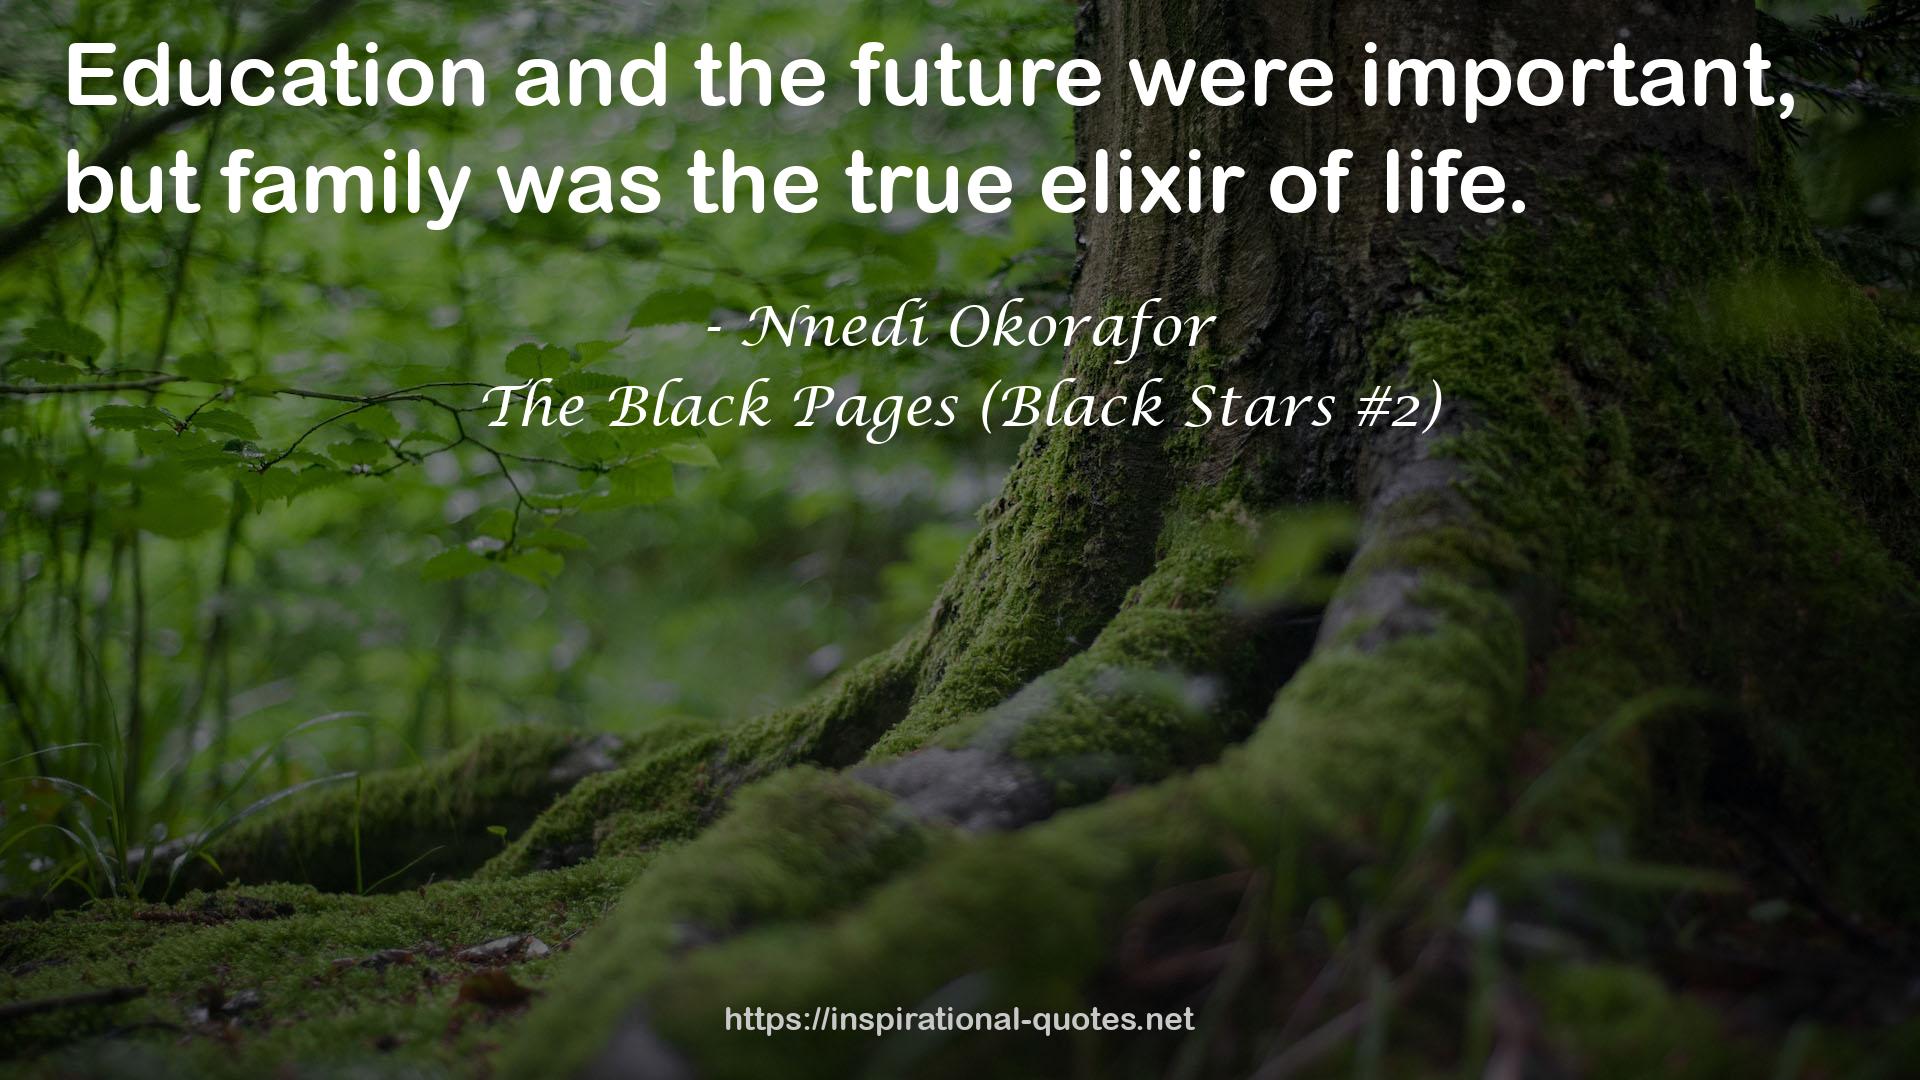 The Black Pages (Black Stars #2) QUOTES